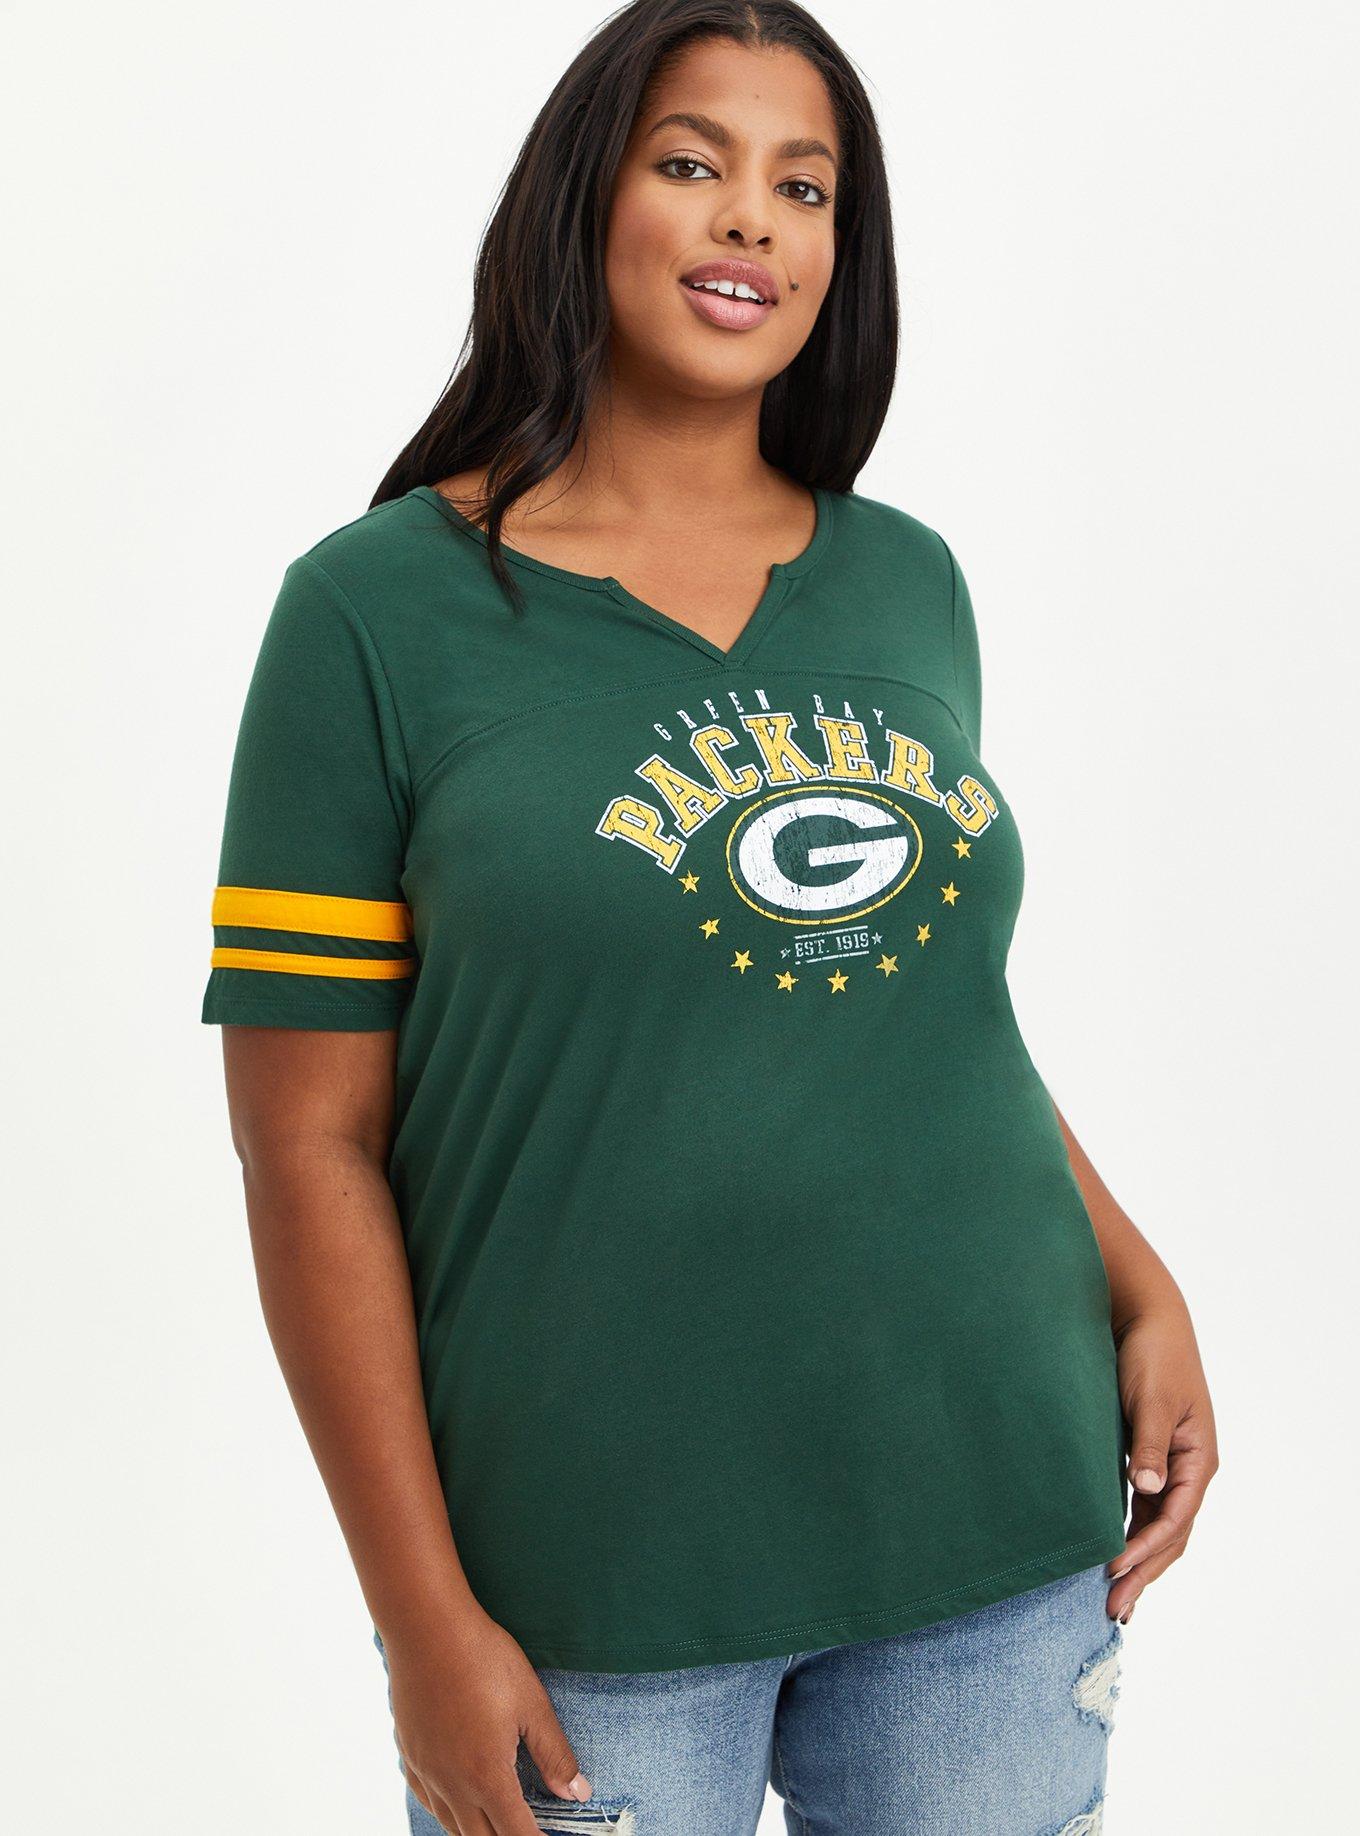 Plus Size - Classic Fit Football Tee - Green Bay Packers Green - Torrid